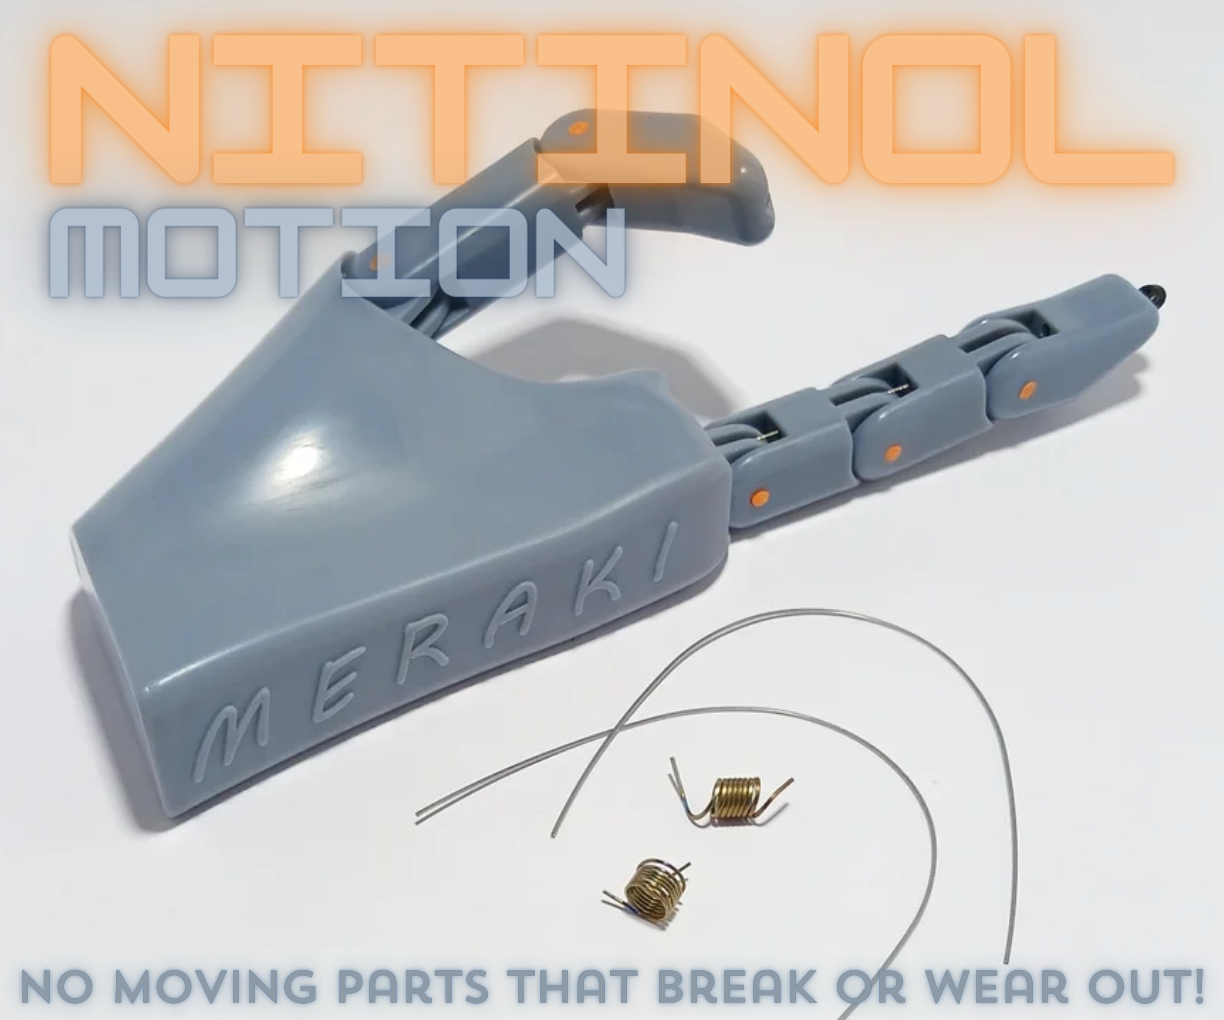 Solid State Motion System Using Nitinol!